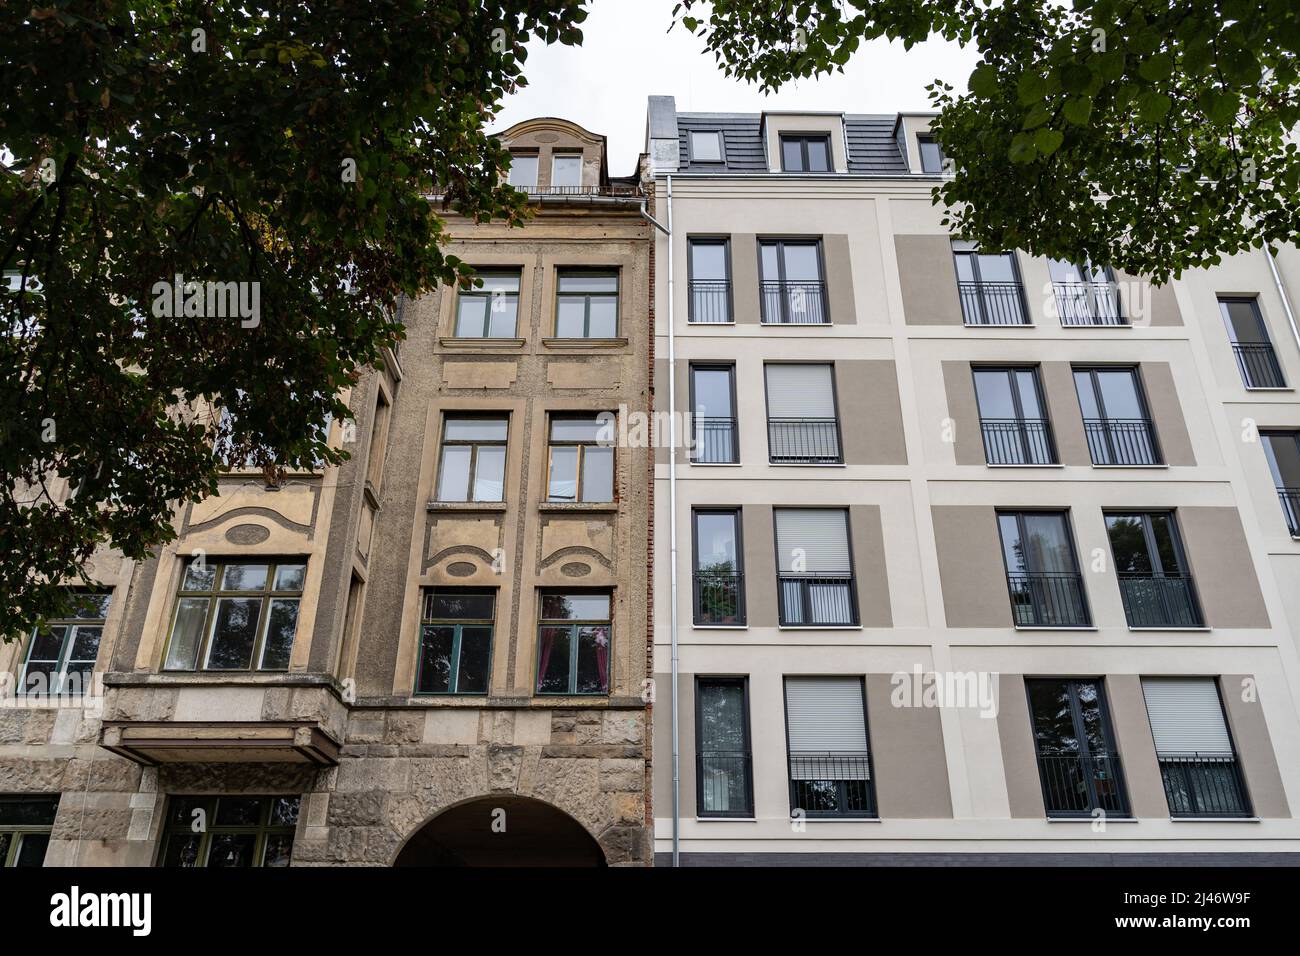 Facades of an old building next to a new building. Contrast in architecture styles of different eras. Historic and modern exteriors for an apartment. Stock Photo